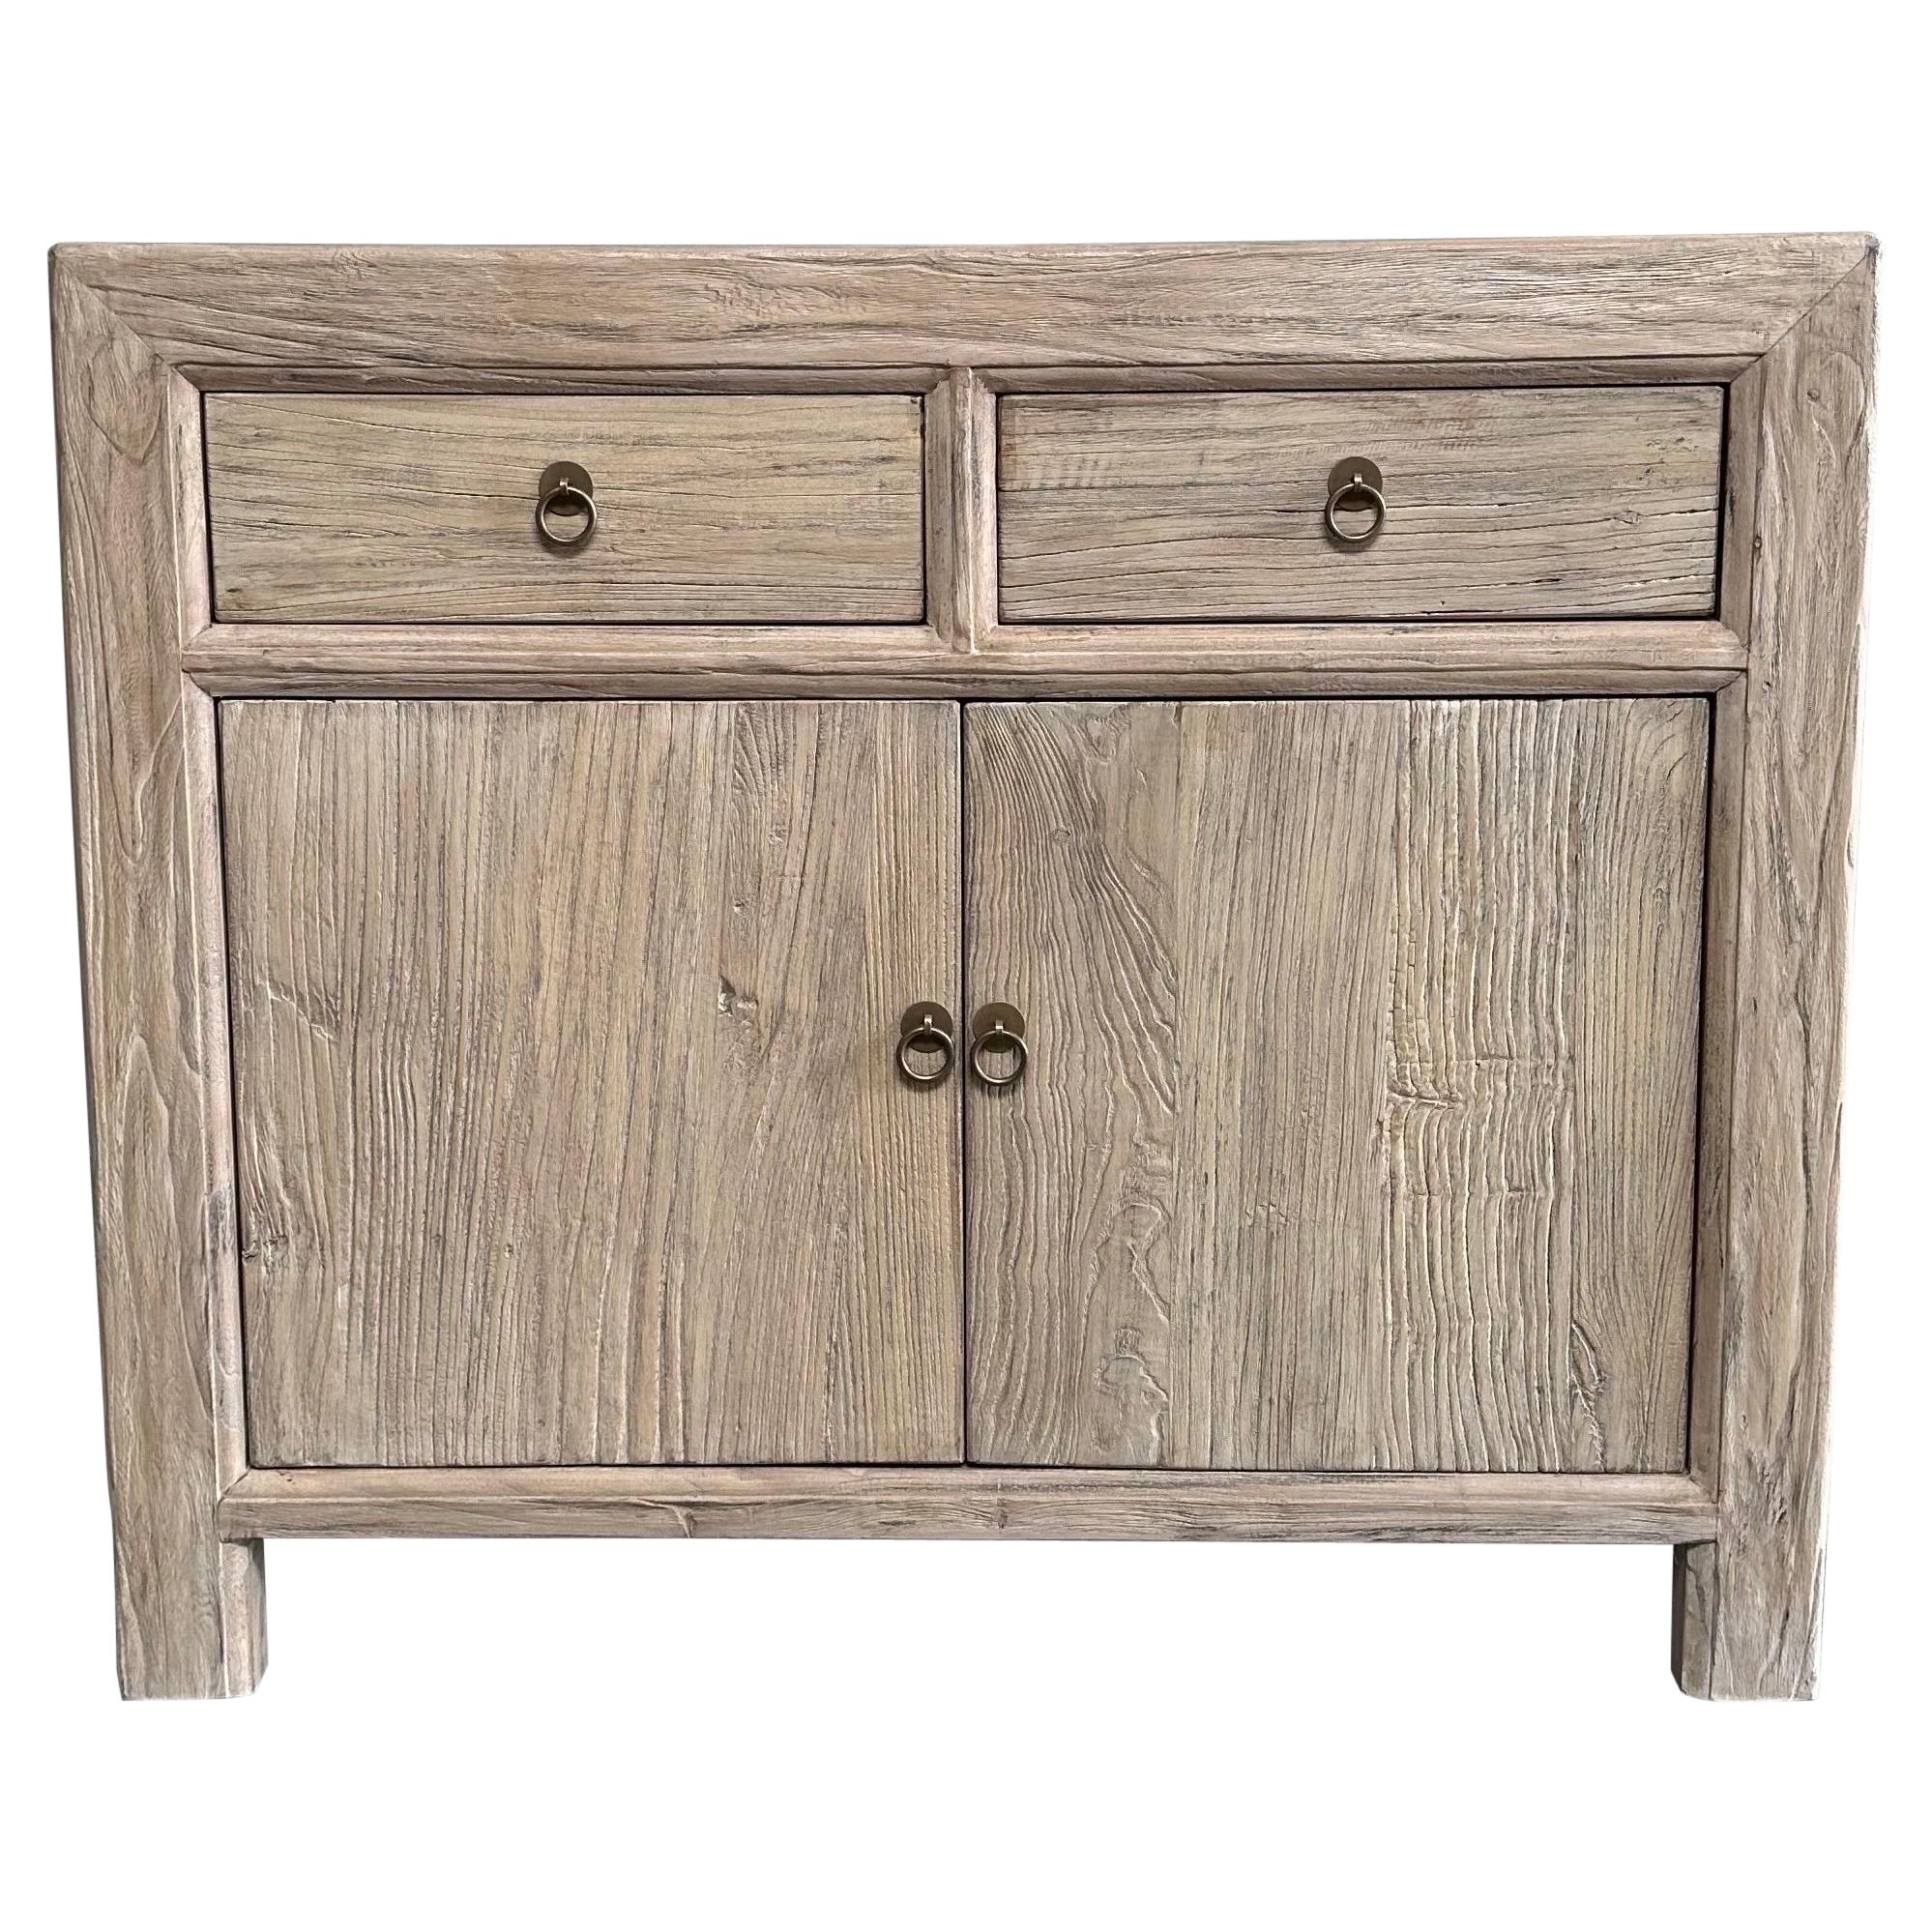 Luna Reclaimed Elm Wood Cabinet with Drawers